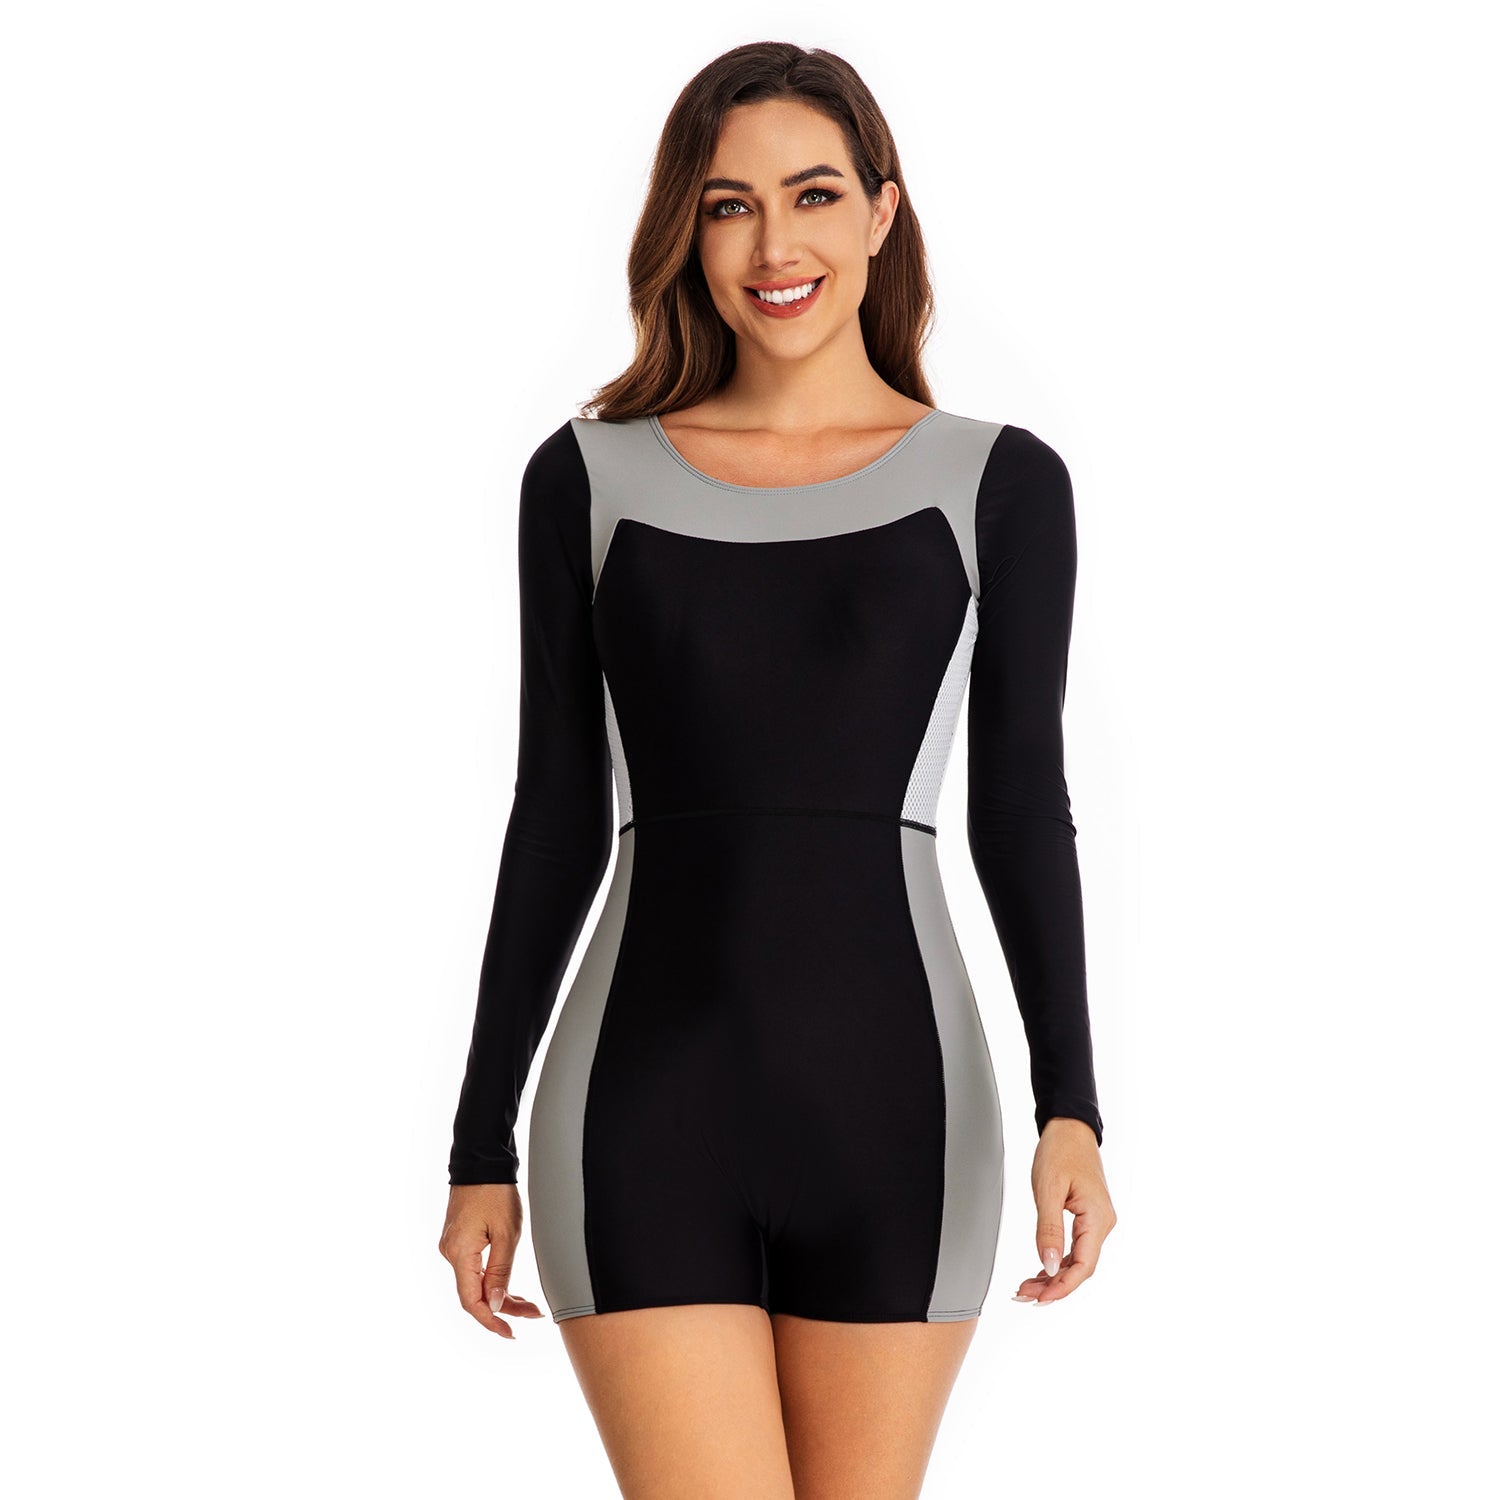 Bathing Suit Long Sleeve Surfing Swimsuit